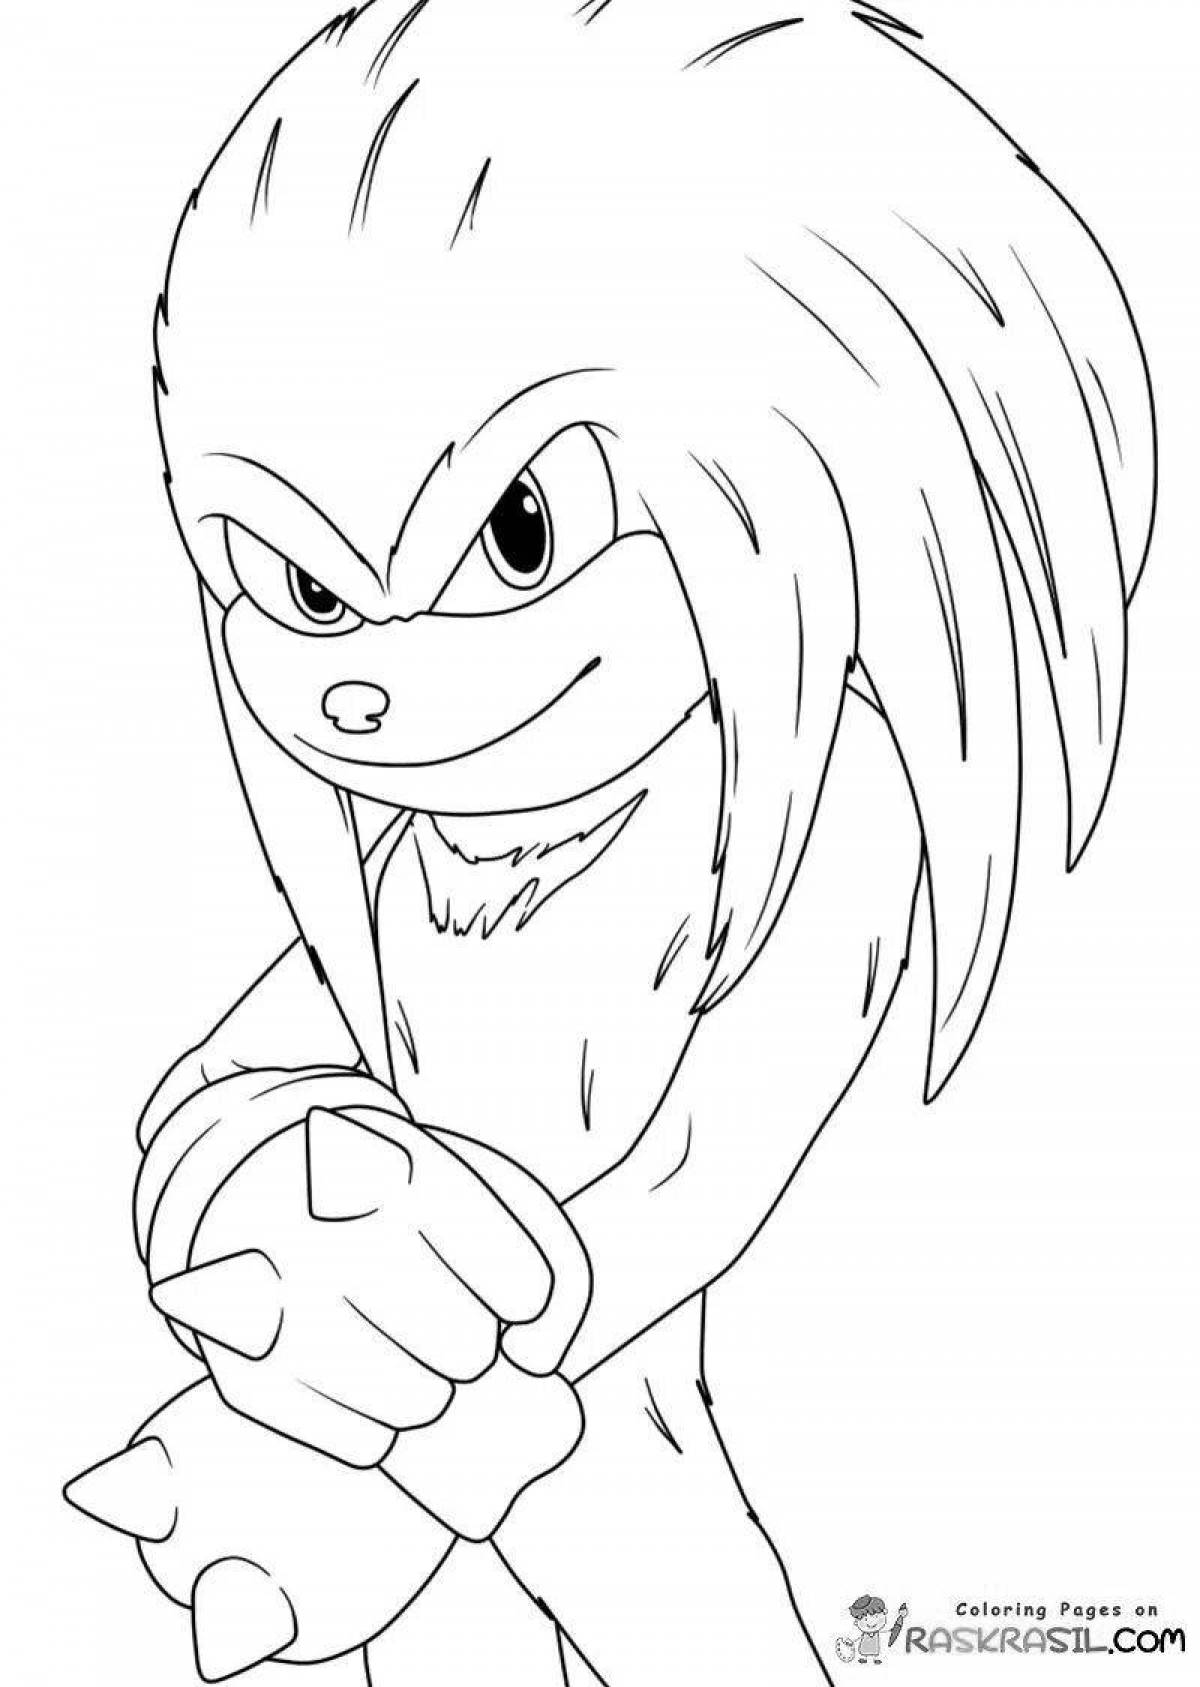 Fancy coloring sonic knuckles